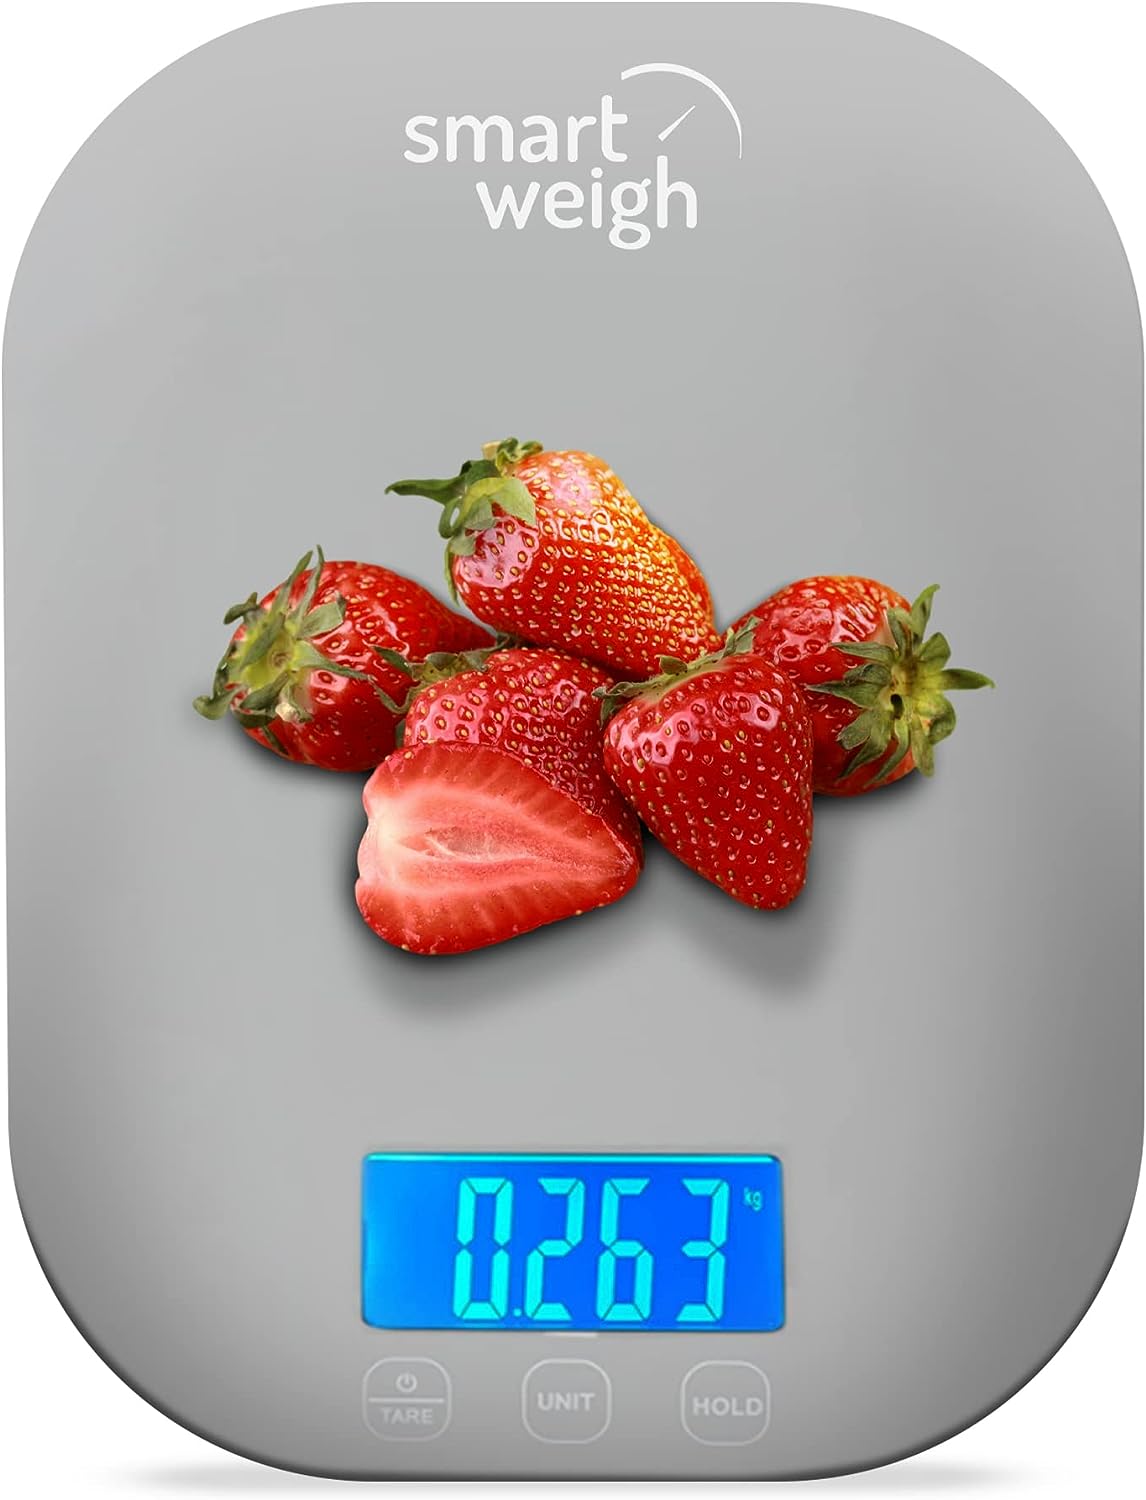 Etekcity Food Kitchen Scale, Digital Grams and Ounces LCD Display, Medium,  Pink